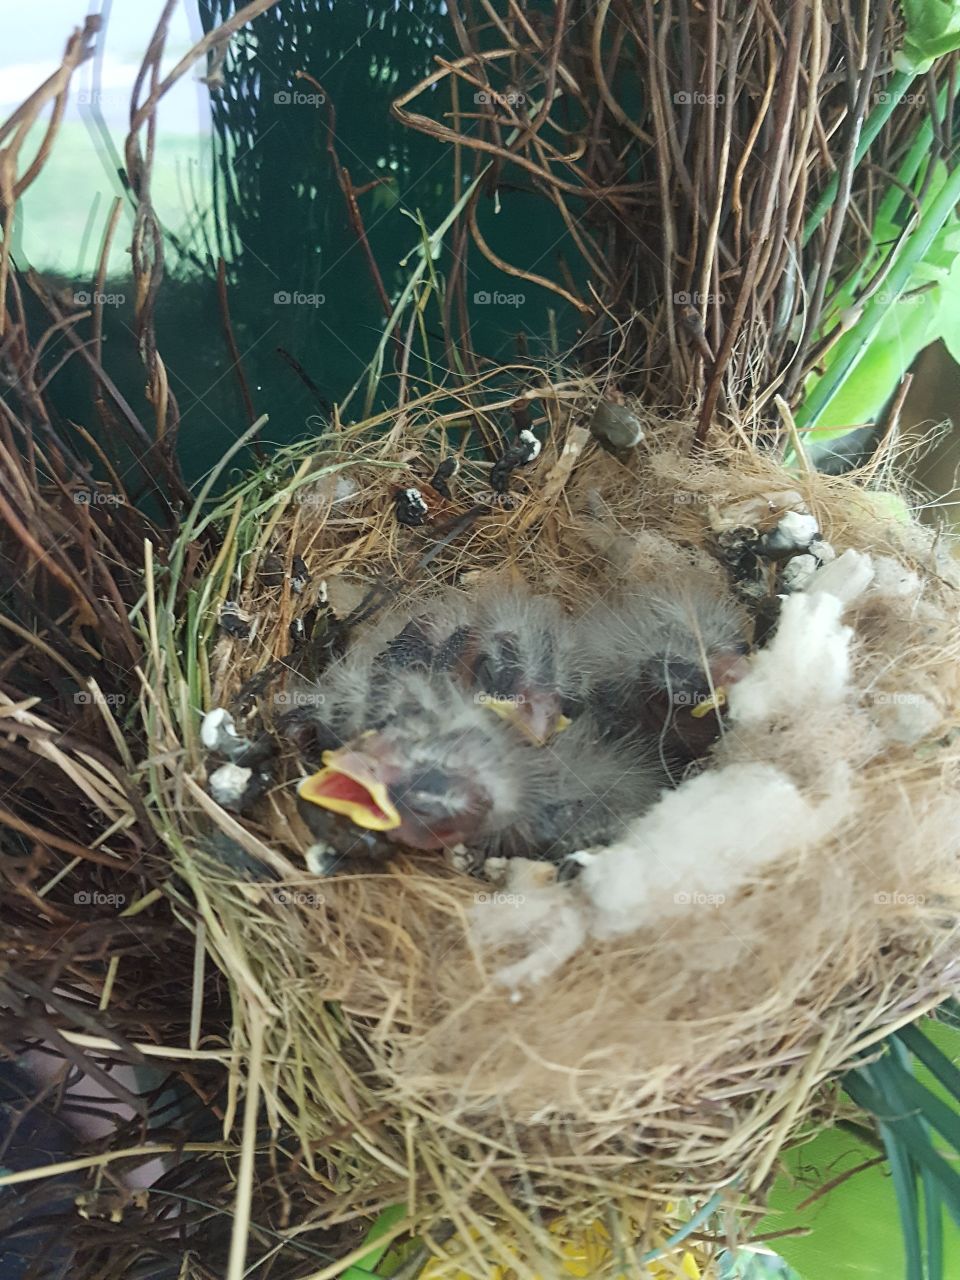 newly hatched birds